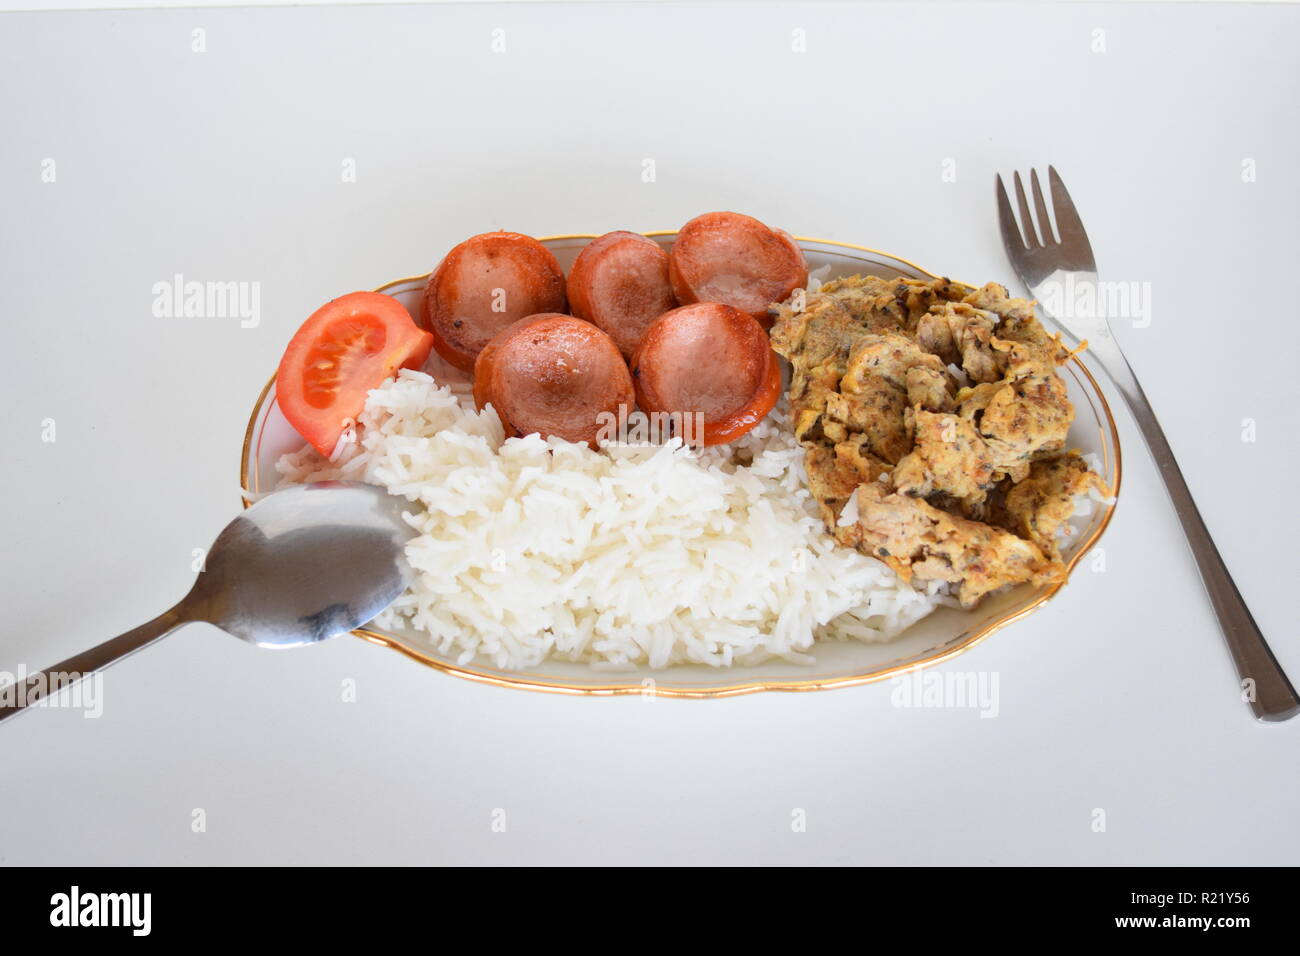 A freshly cooked breakfast of egg, Lyoner sausage, tomatoes and rice at Lety’s Transient Homes Baguio, B&B. Ein frisch zubereitetes Frühstück Stock Photo